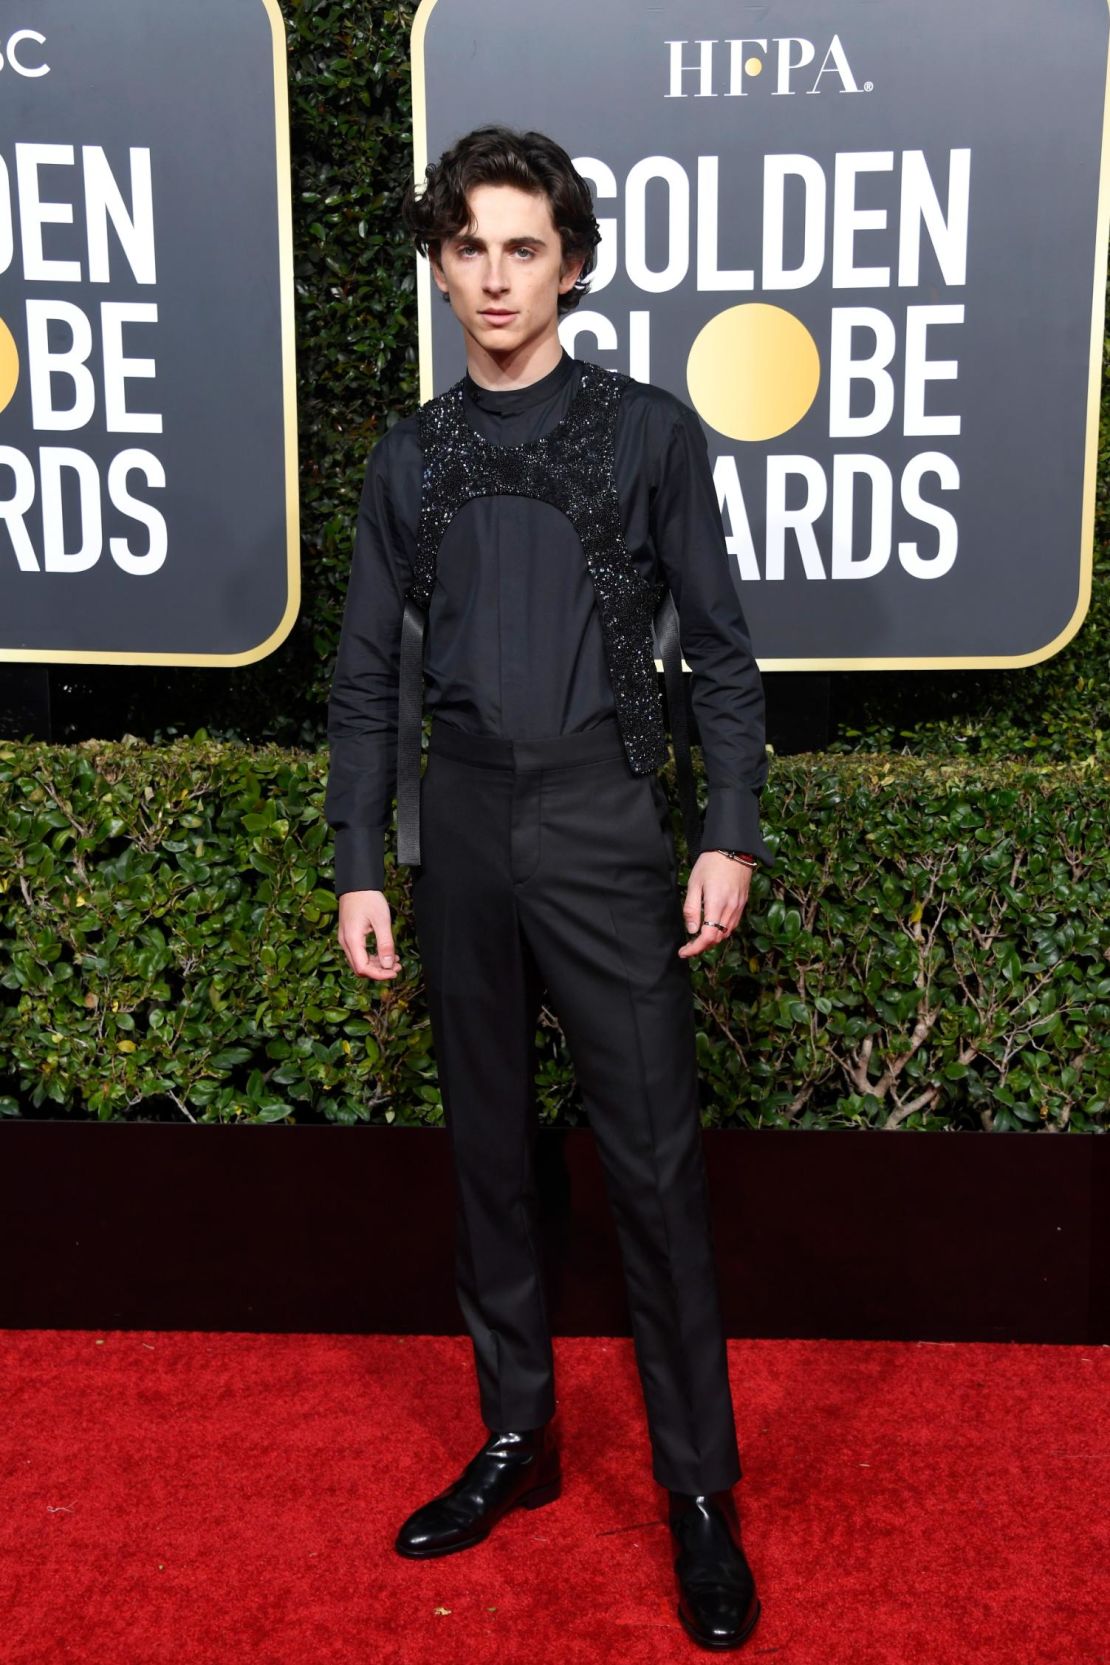 Social media exploded when Chalamet wore this black glittering Louis Vuitton harness to the Golden Globes.